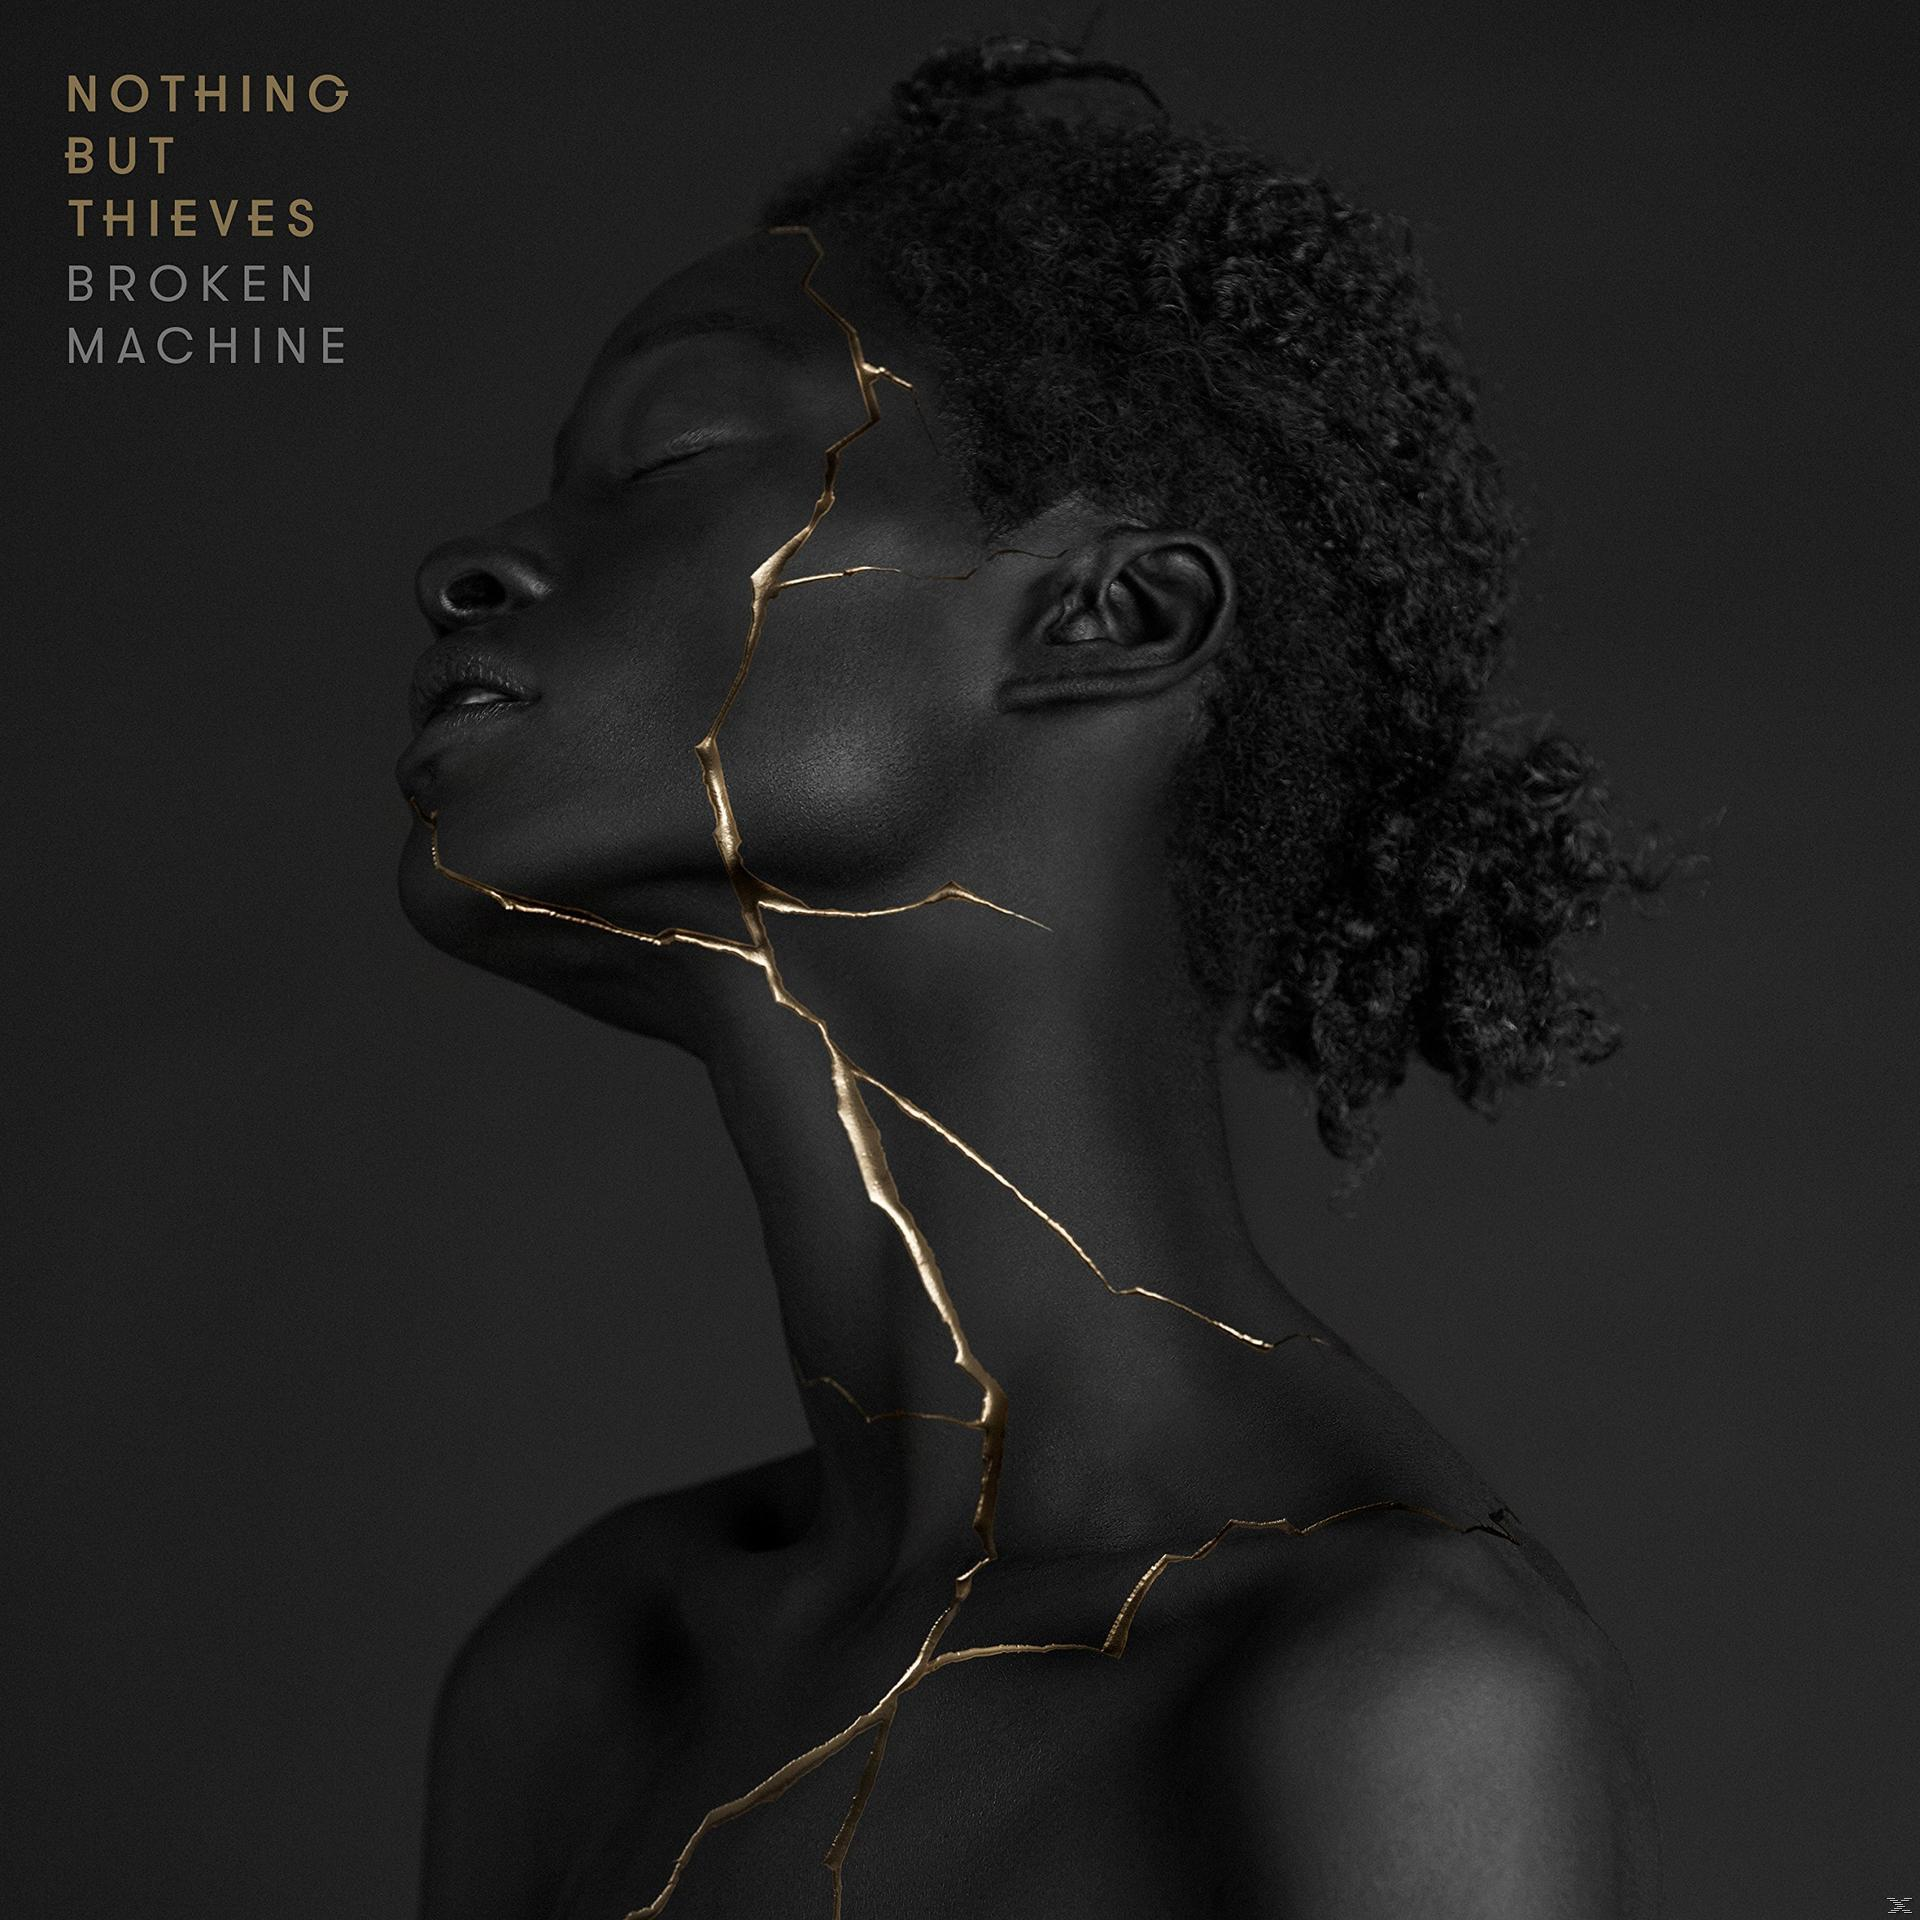 (CD) (Deluxe) Broken Thieves But Machine Nothing - -